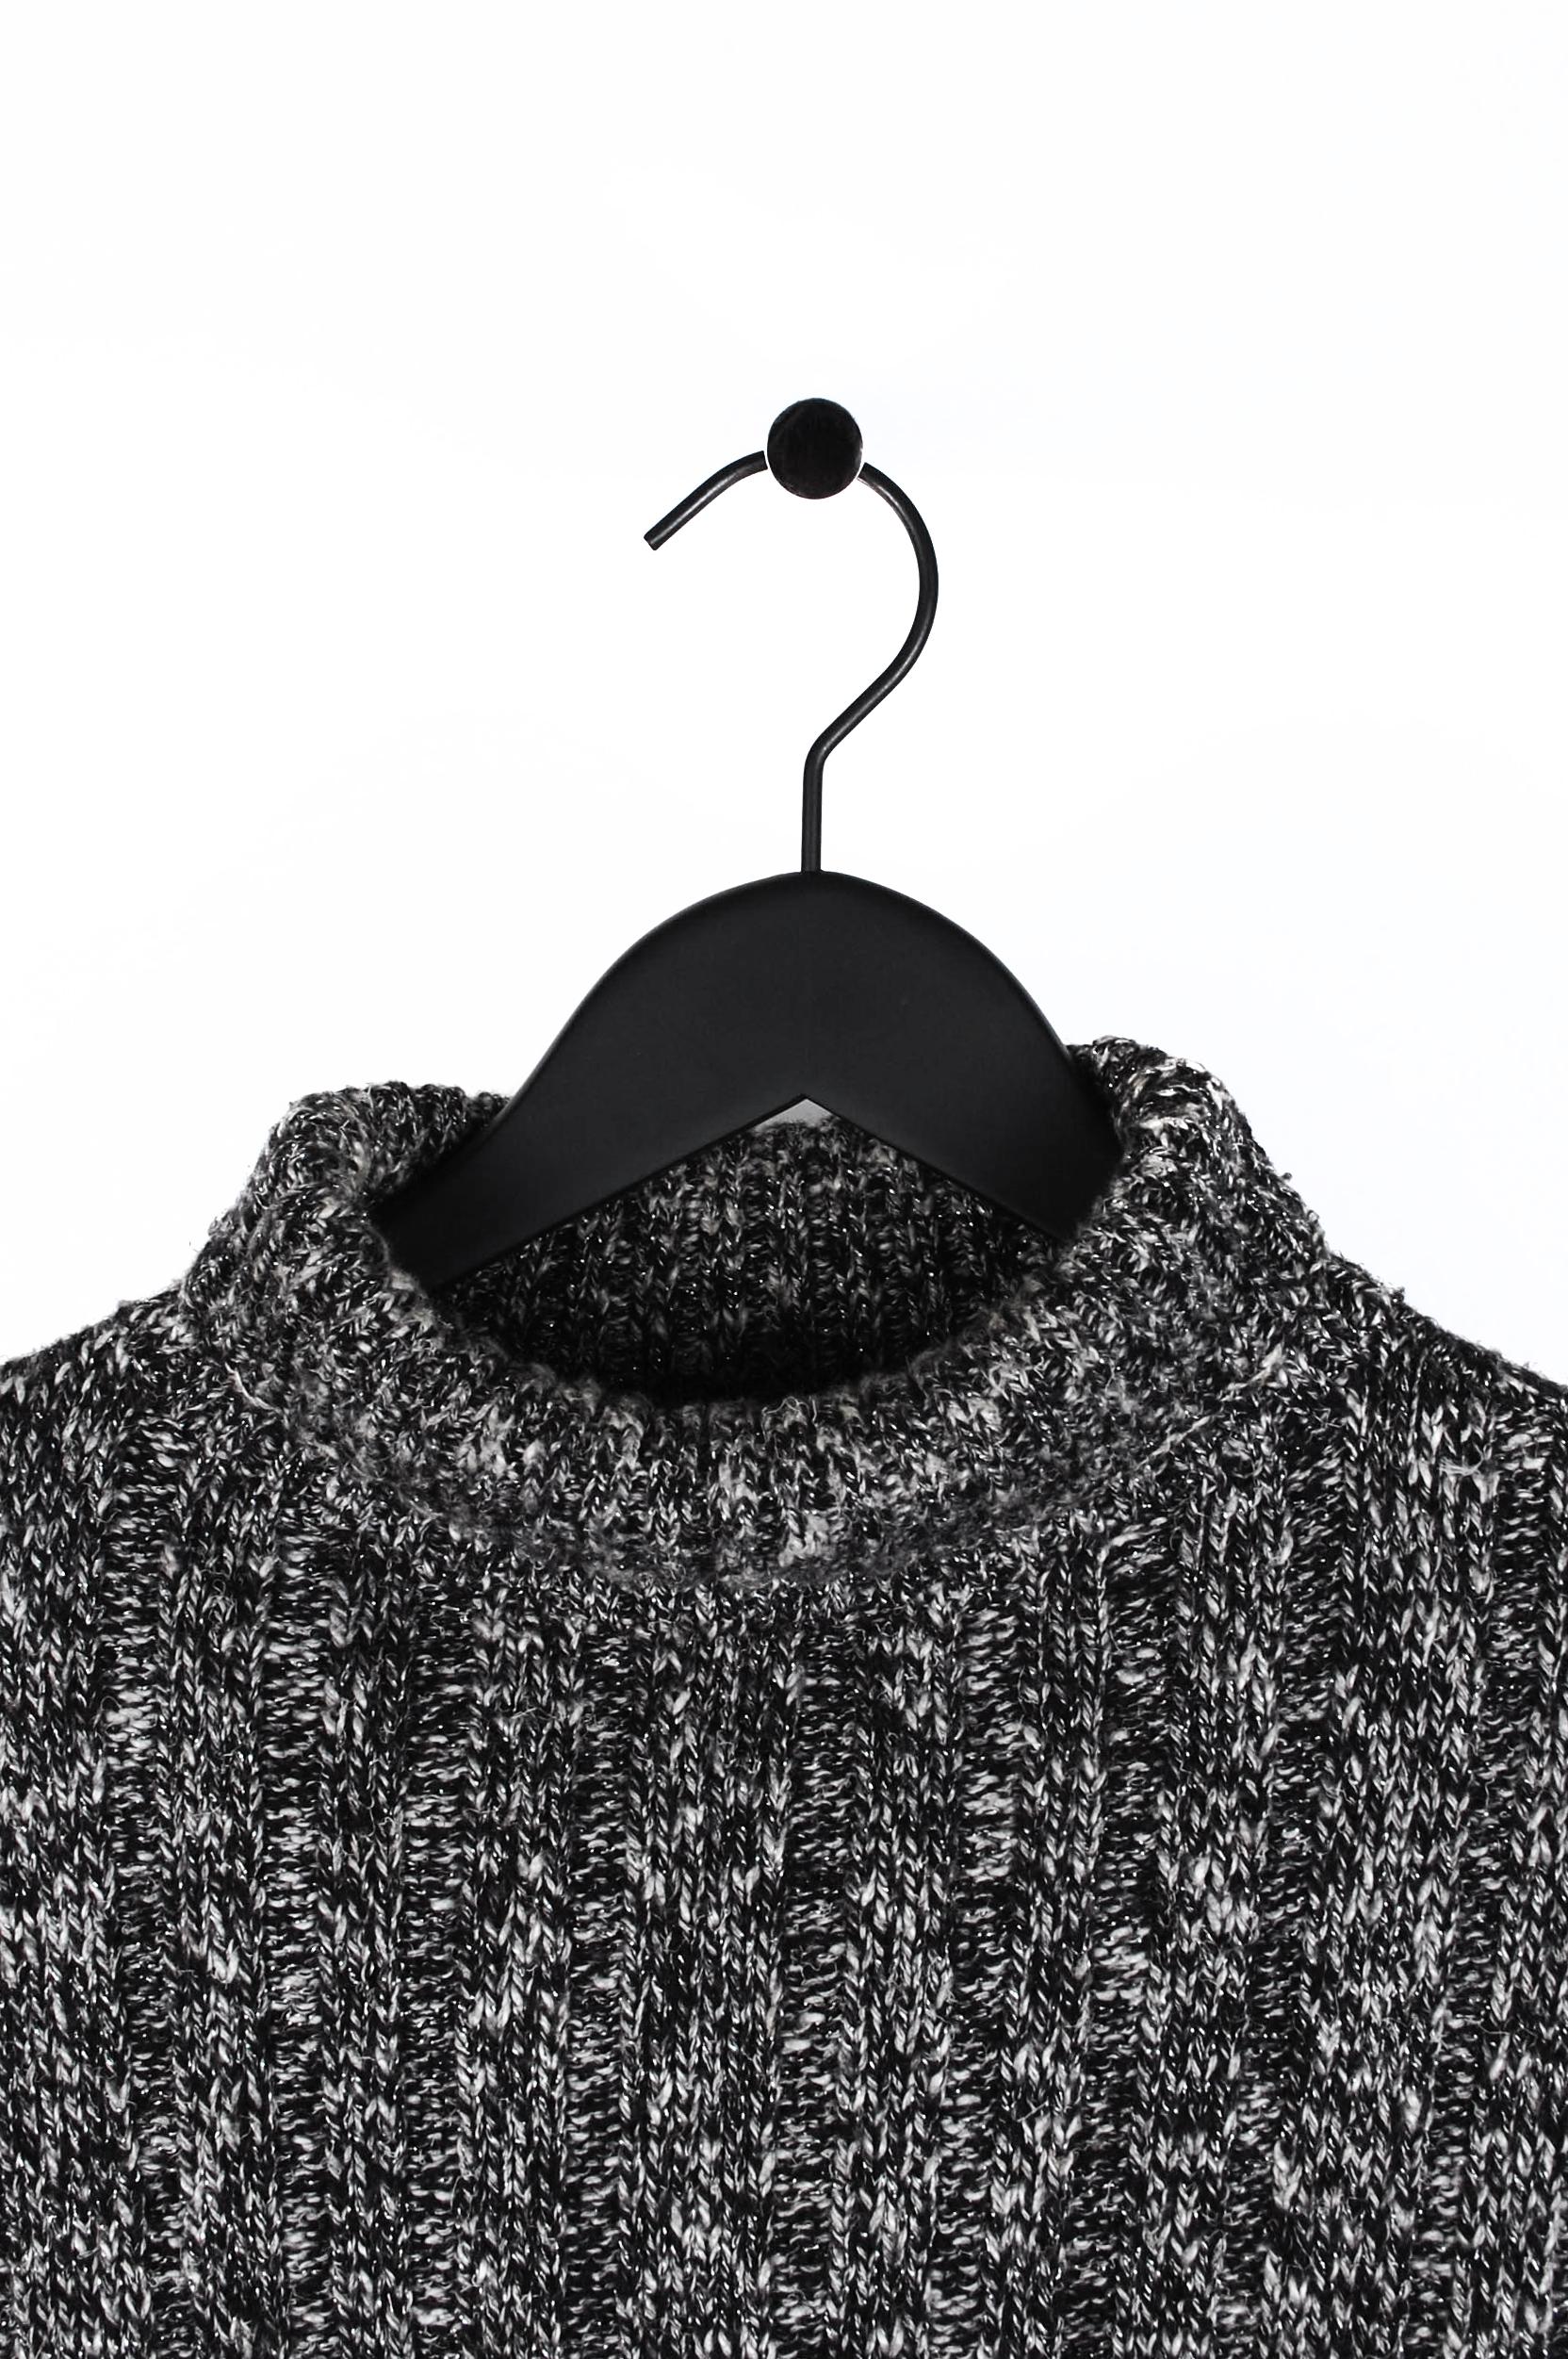 Item for sale is 100% genuine Dolce&Gabbana Vintage Turtle Neck Men Sweater
Color: Grey but has a very nice shiny silver look
(An actual color may a bit vary due to individual computer screen interpretation)
Material: 40% wool, 30% cotton, 5%